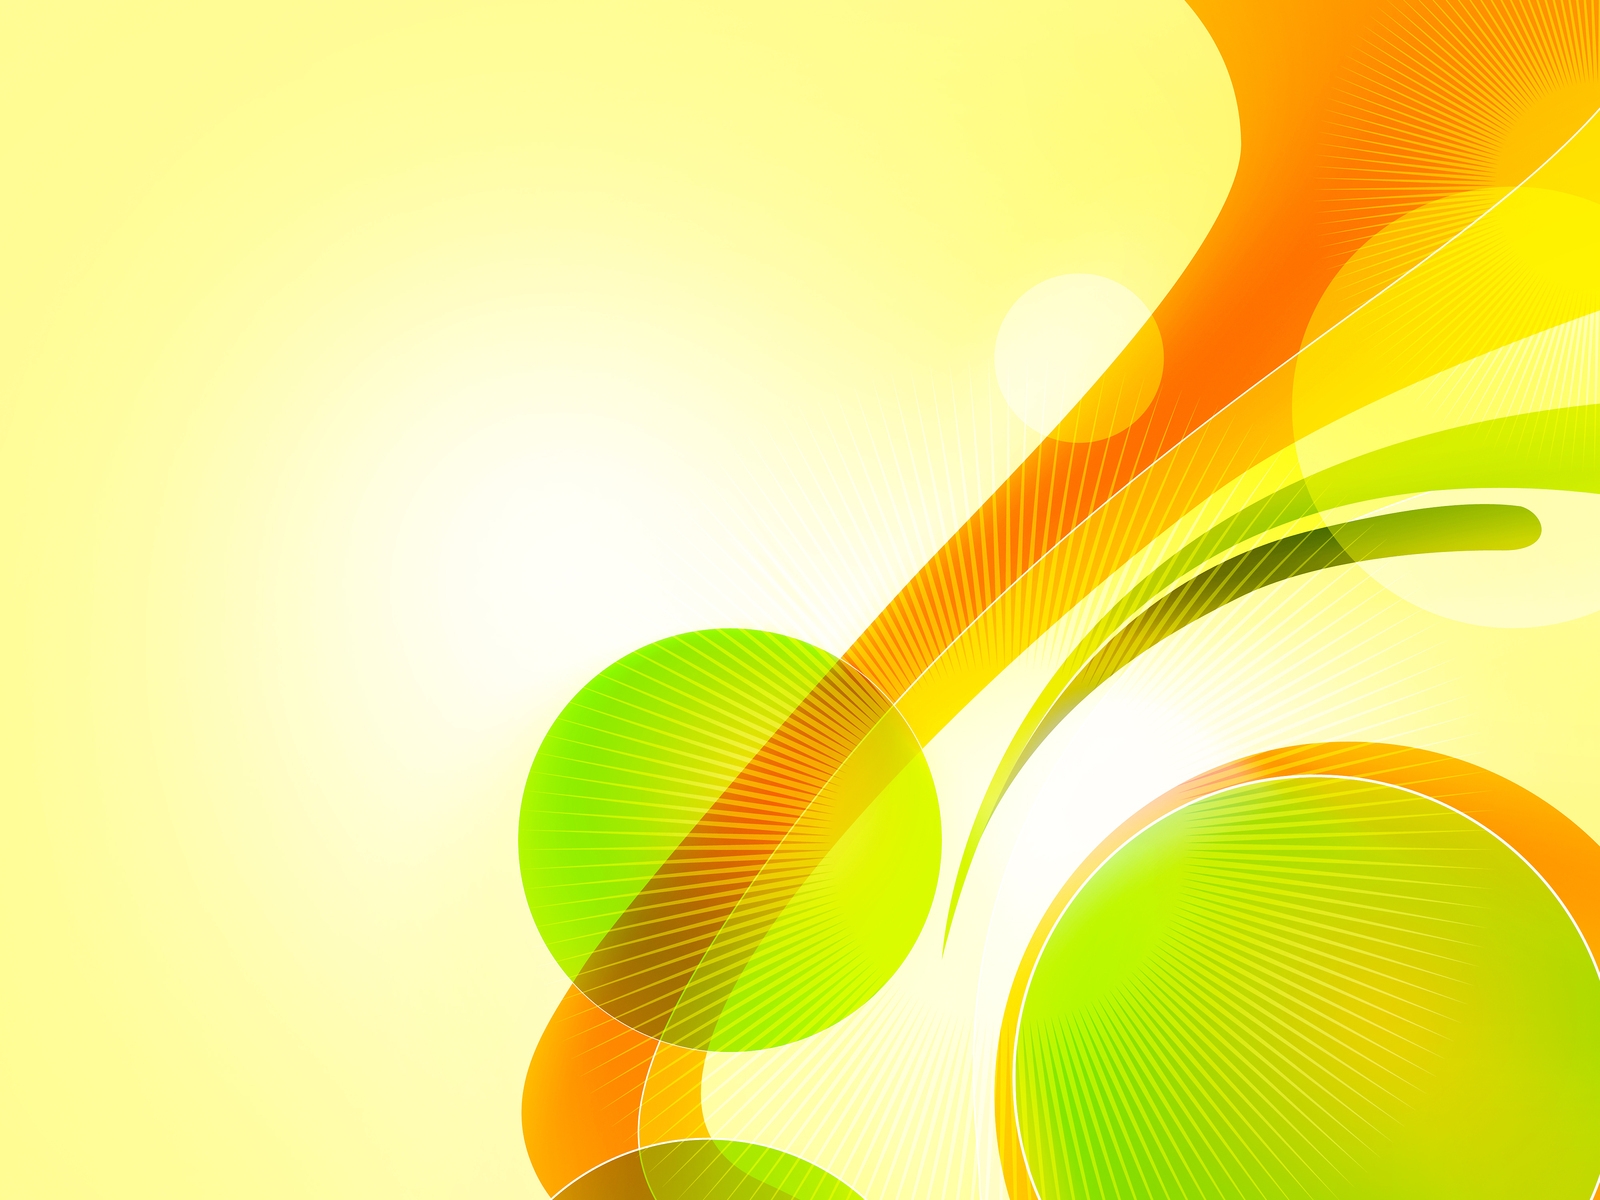 Great Colourful Abstract for 1600 x 1200 resolution